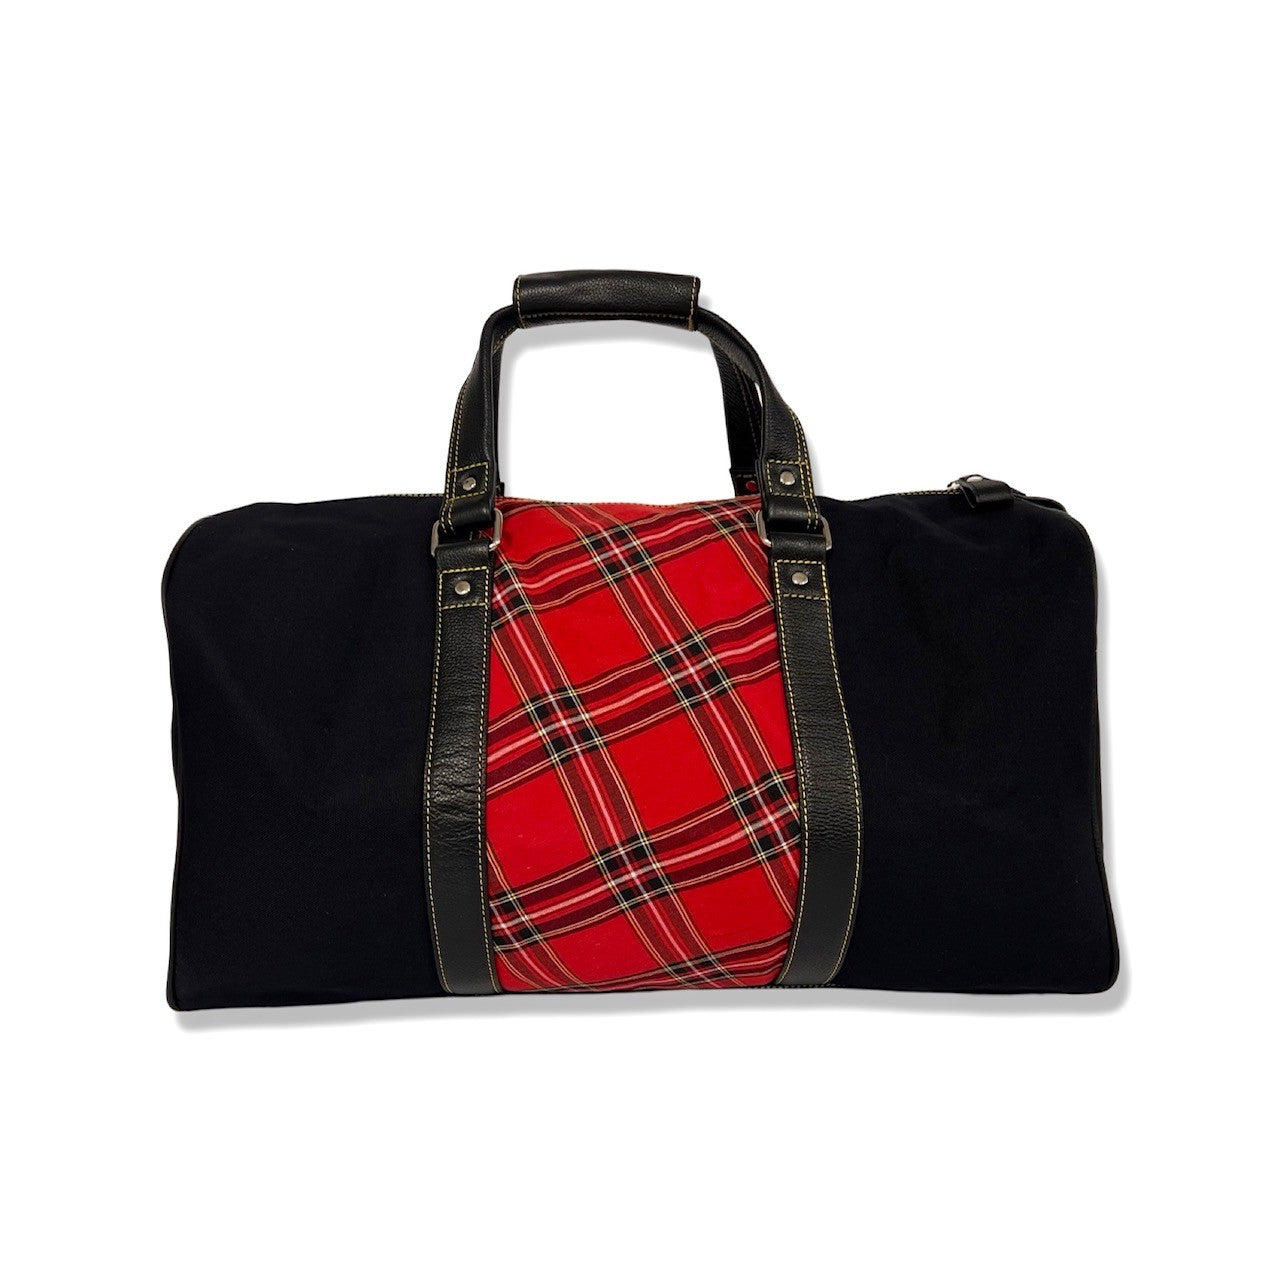 RBC Heritage Leather and Canvas Duffle Bag - Plaid